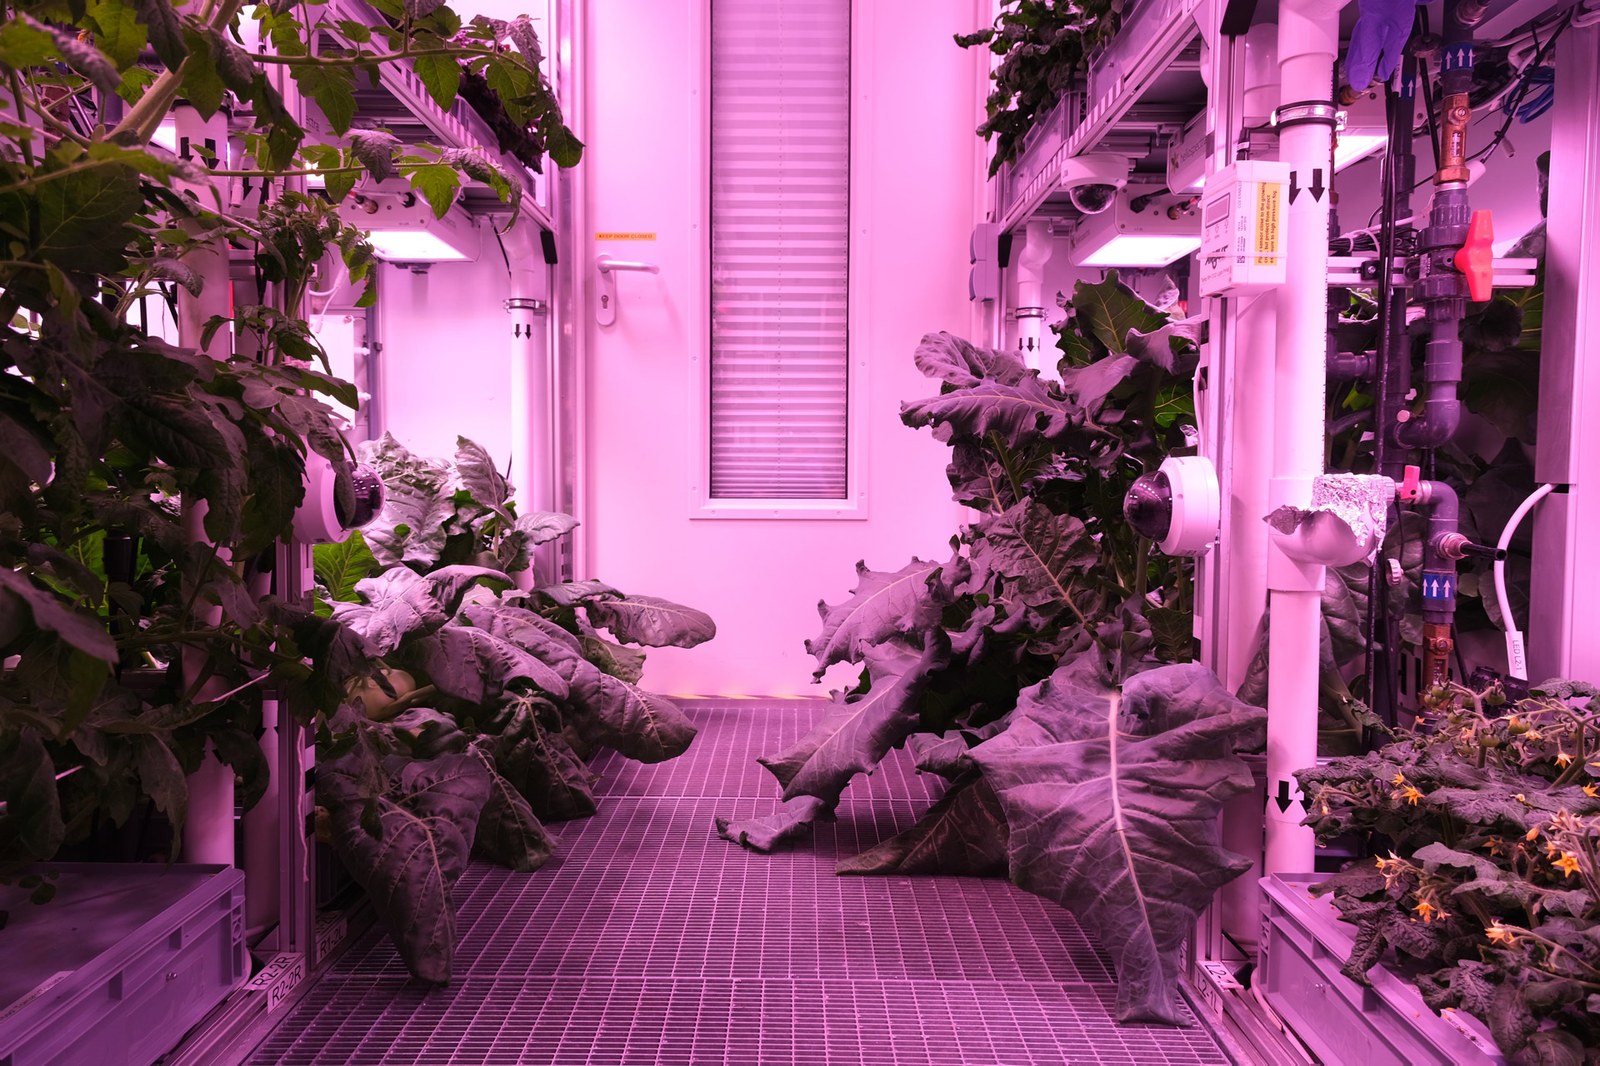 Kohlrabi (left) and broccoli (right) in the EDEN ISS Antarctic greenhouse